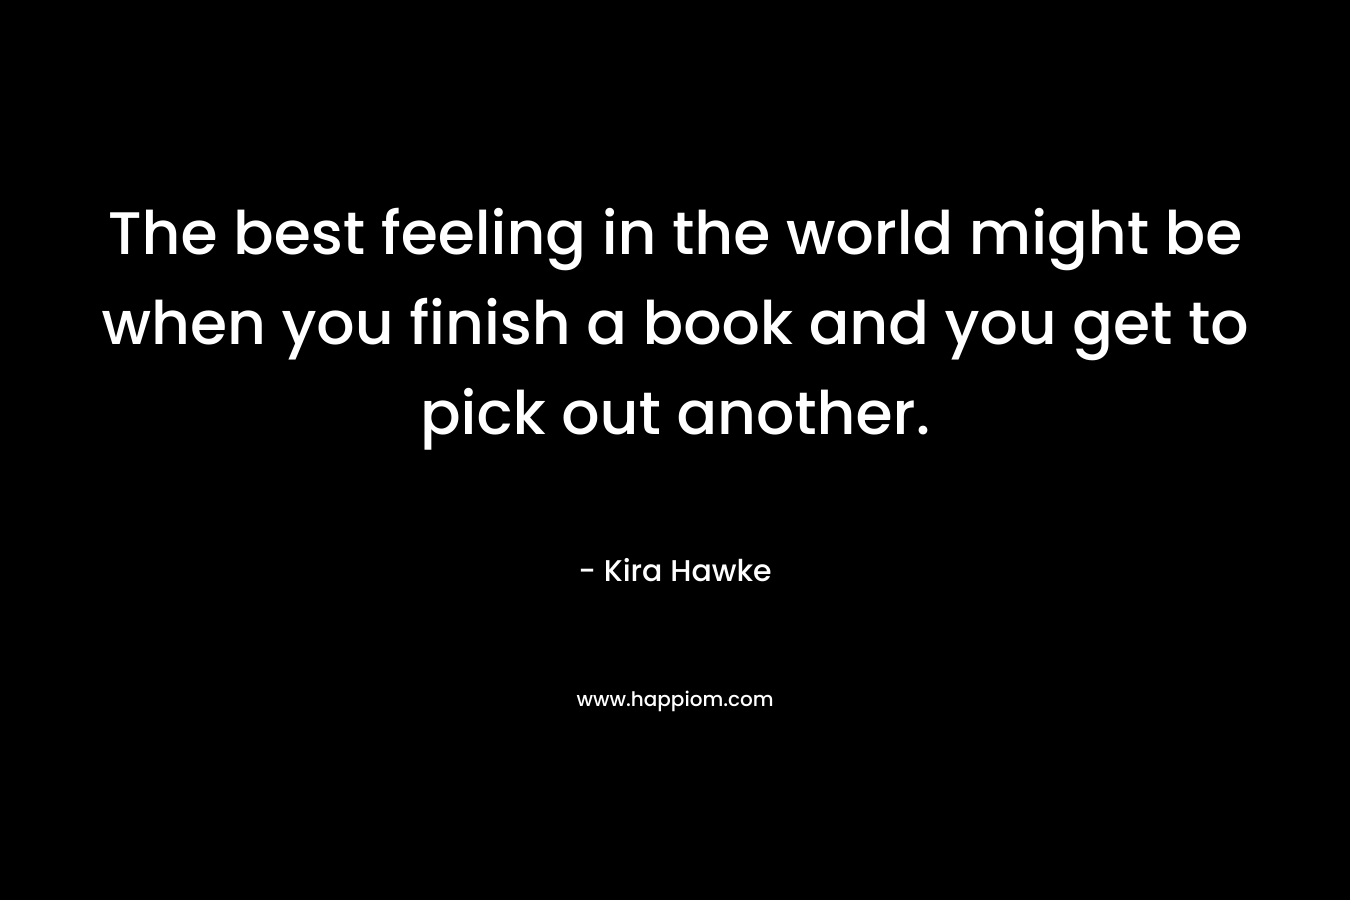 The best feeling in the world might be when you finish a book and you get to pick out another.